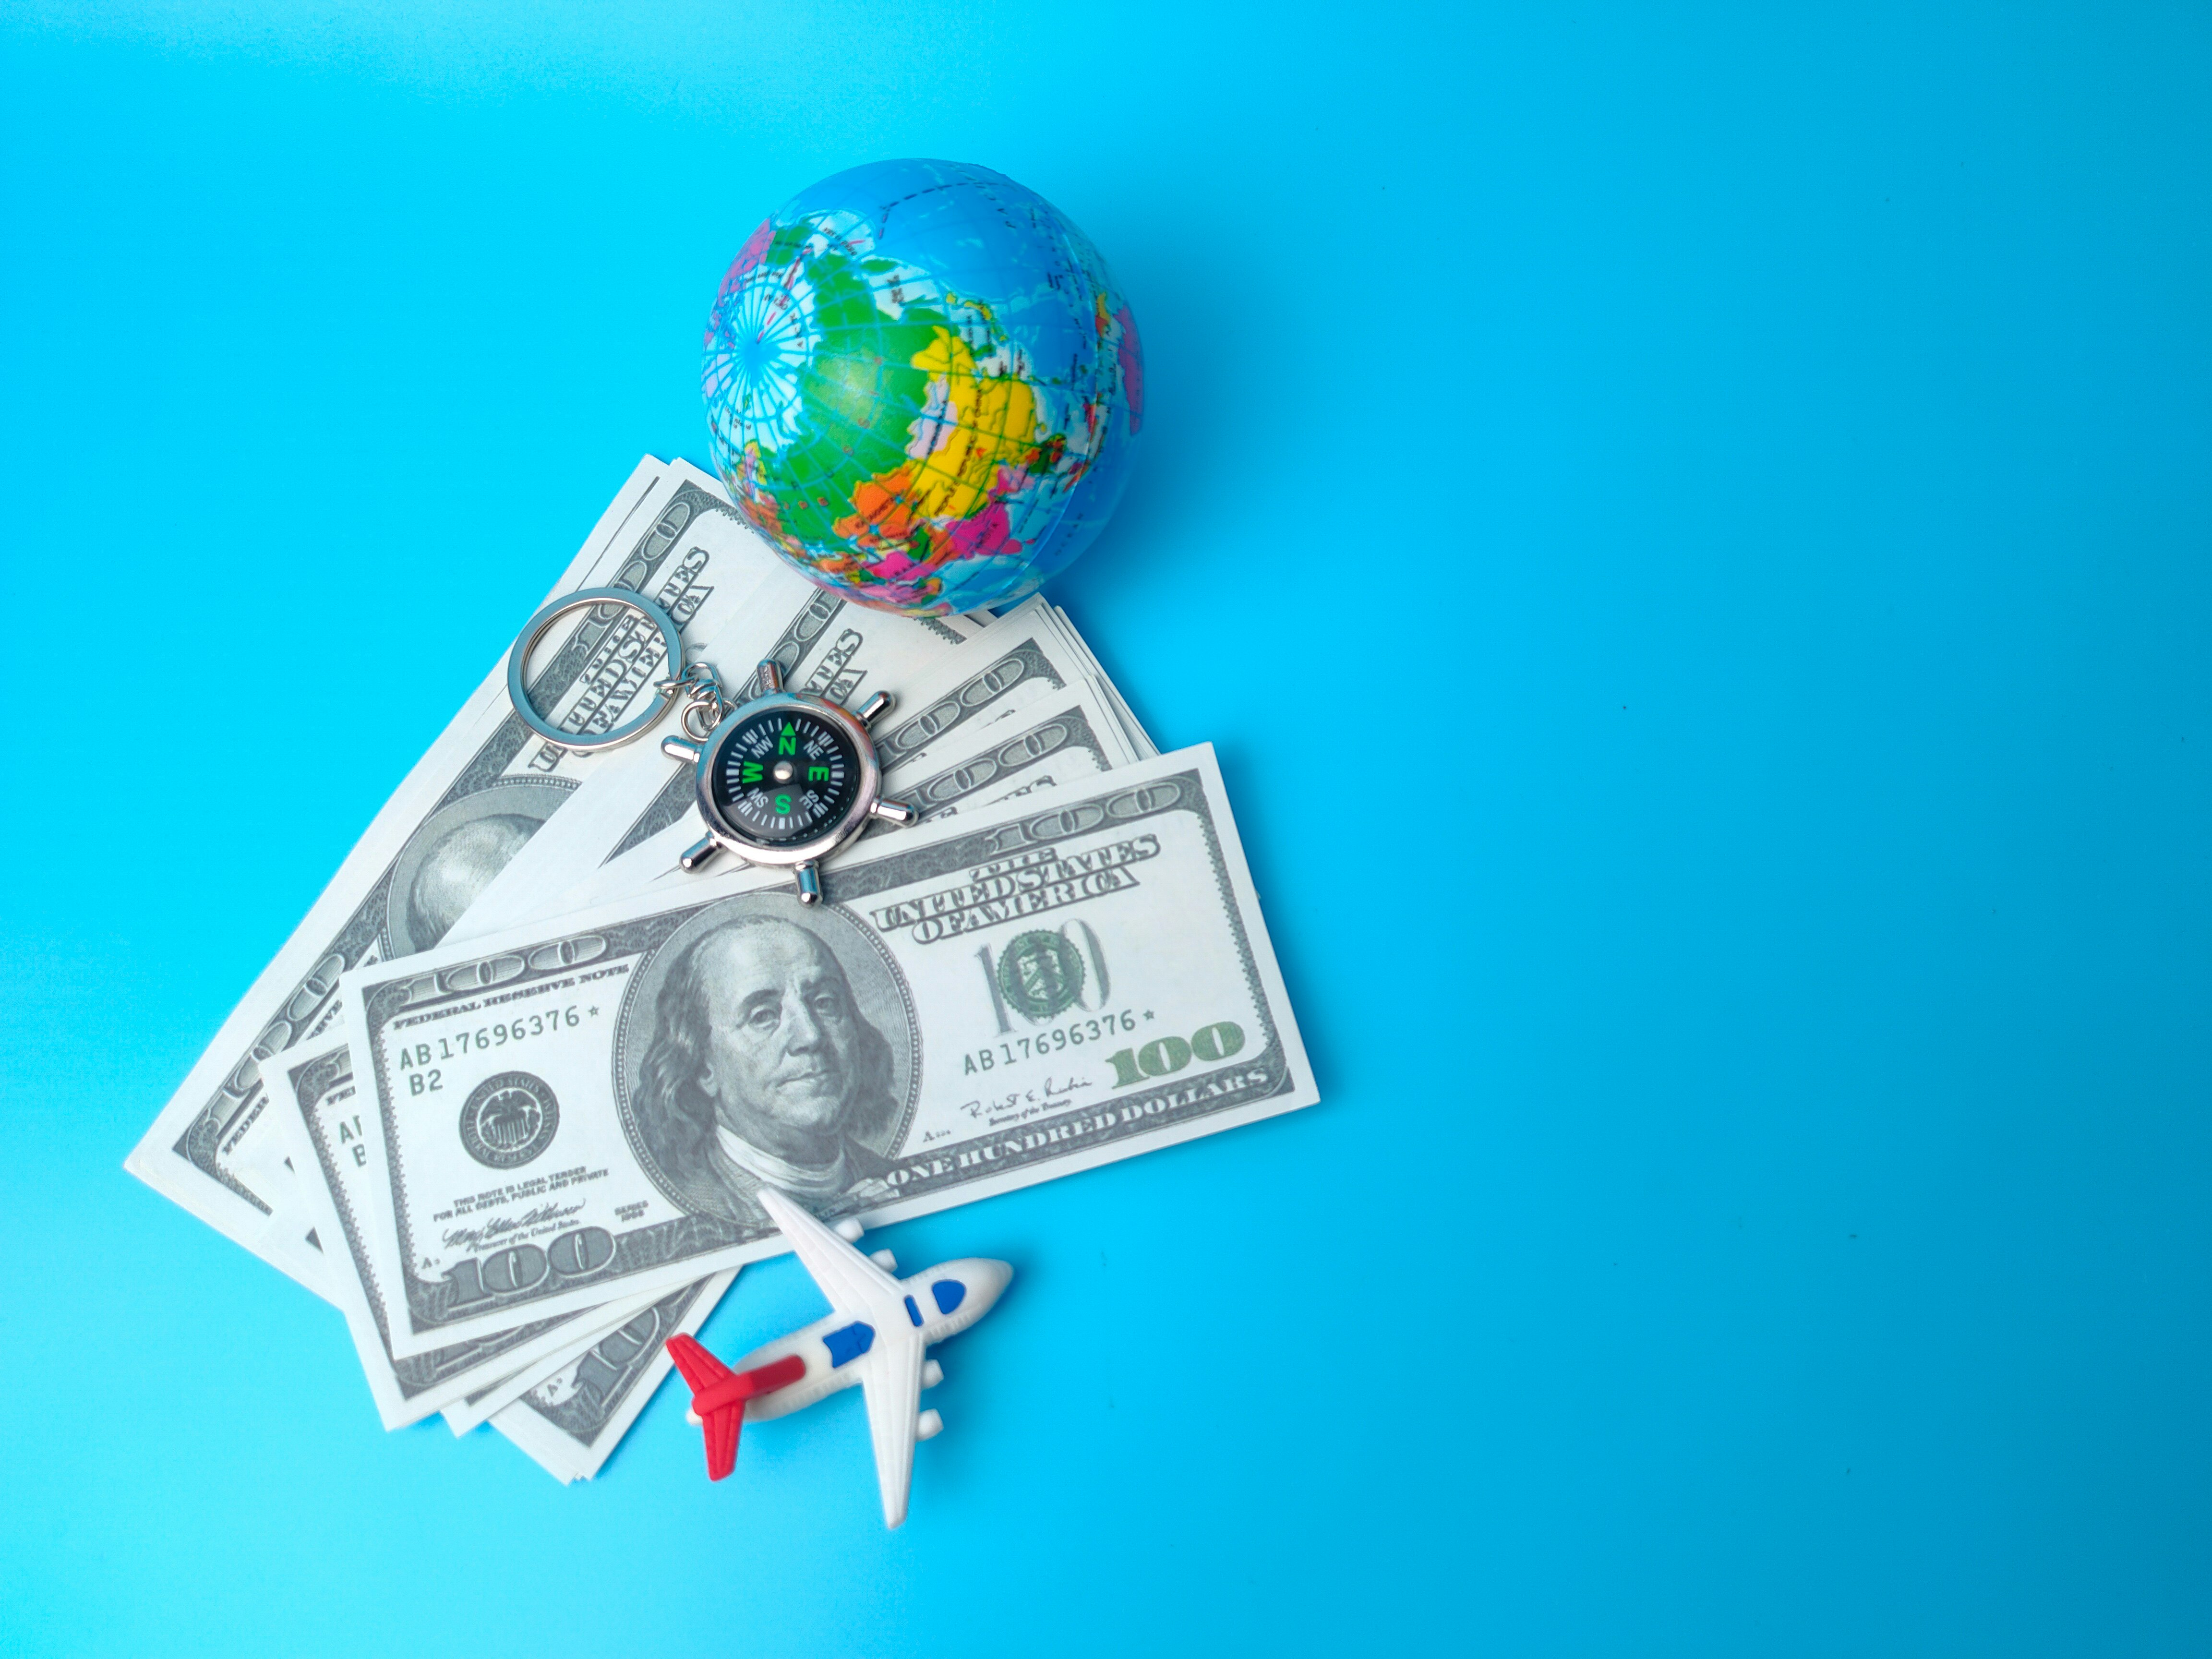 banknotes, earth globe and airplane on blue background.